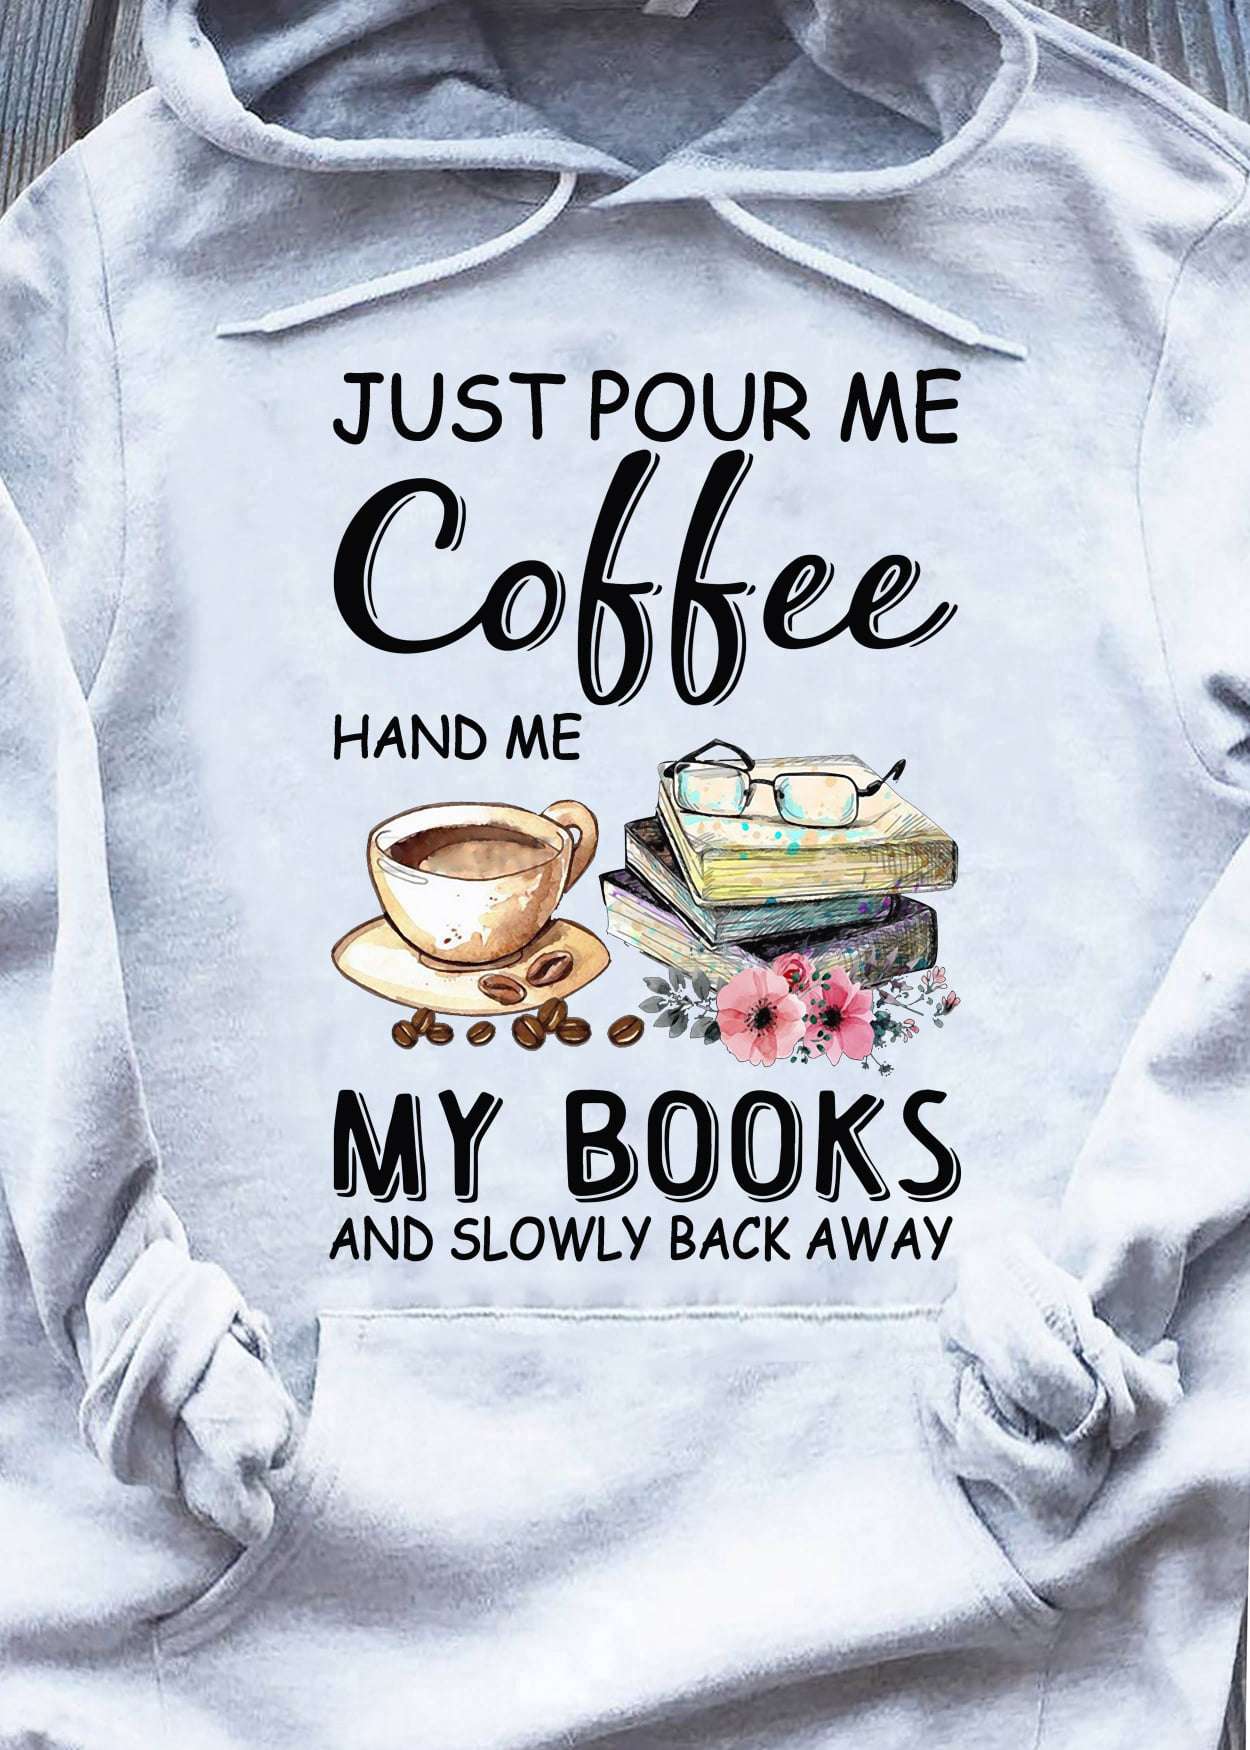 Just pour me coffee, hand me my books and slowly back away - Book and coffee